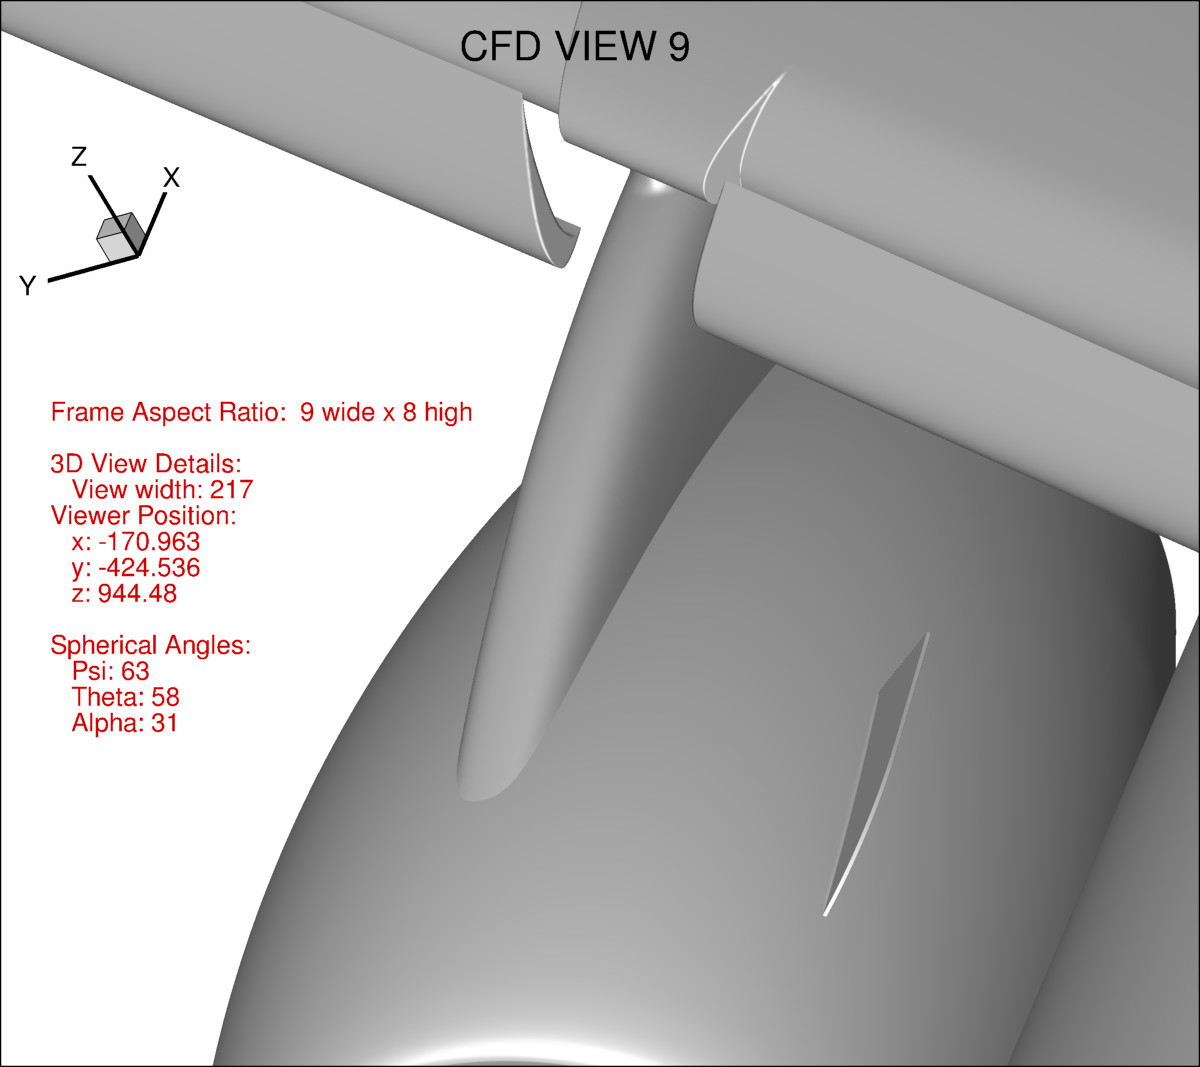 Example CFD view #9